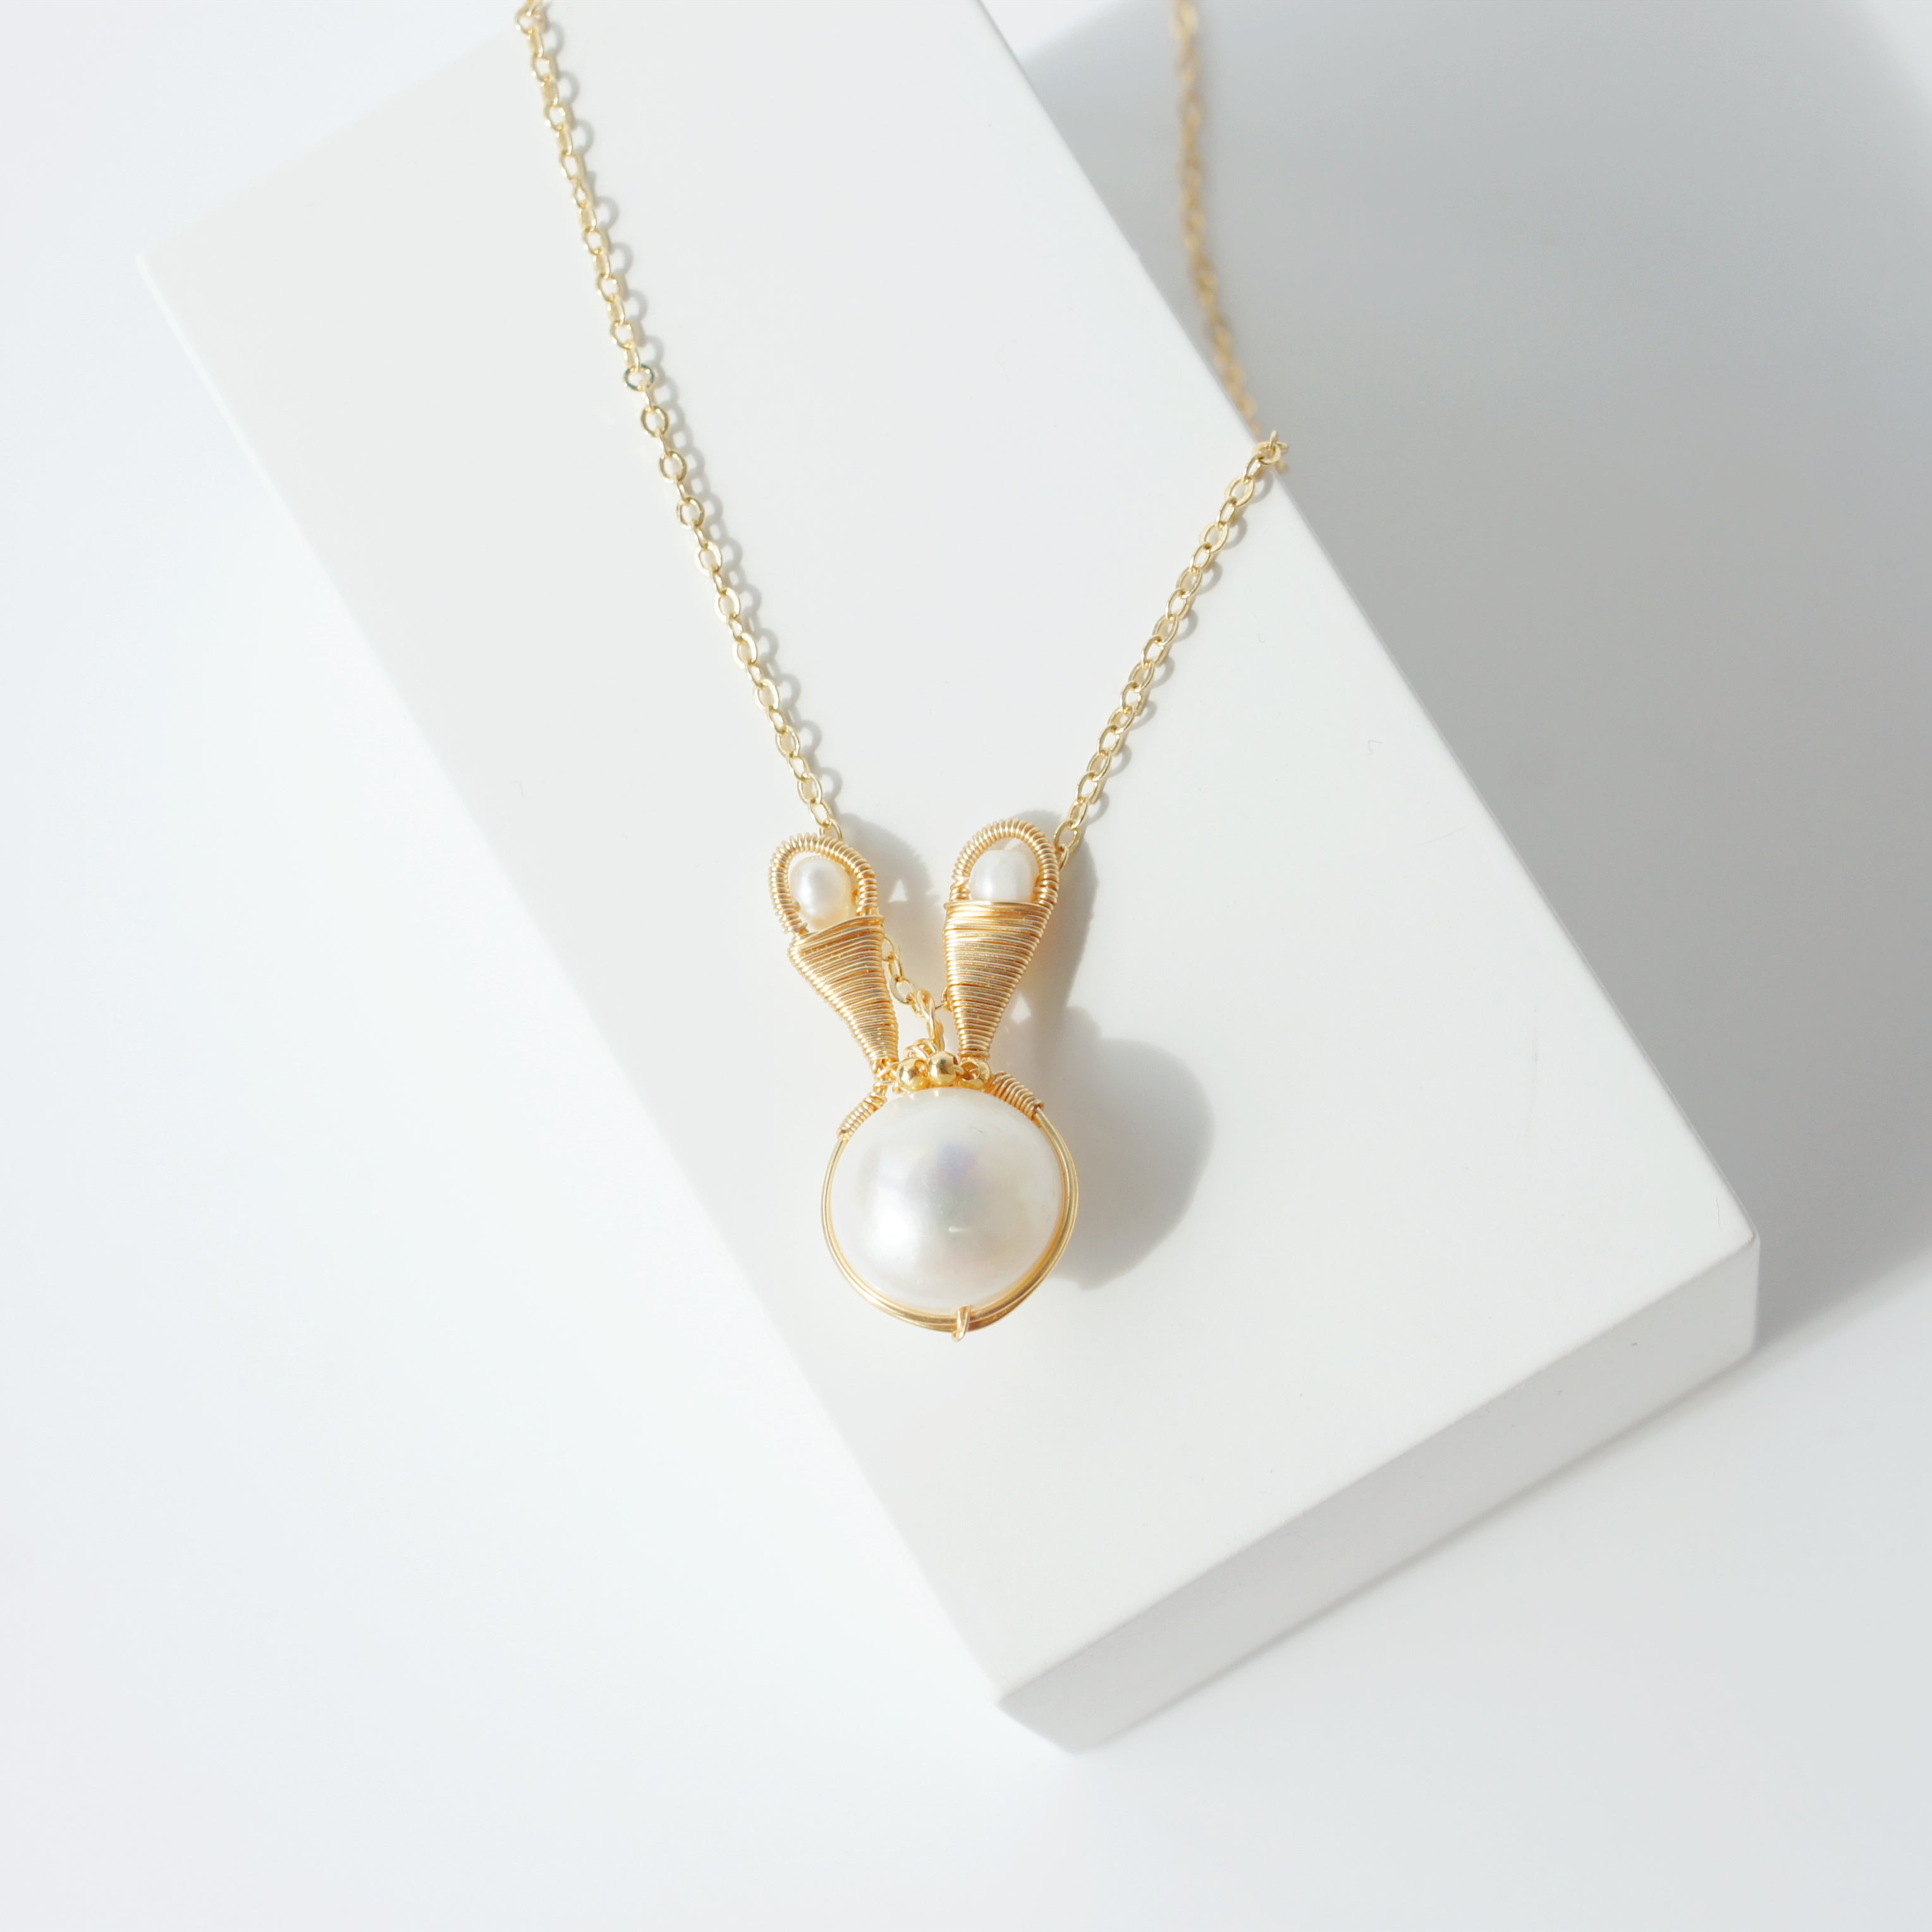 Pearl Bunny Necklace, 12mm Freshwater Pearl